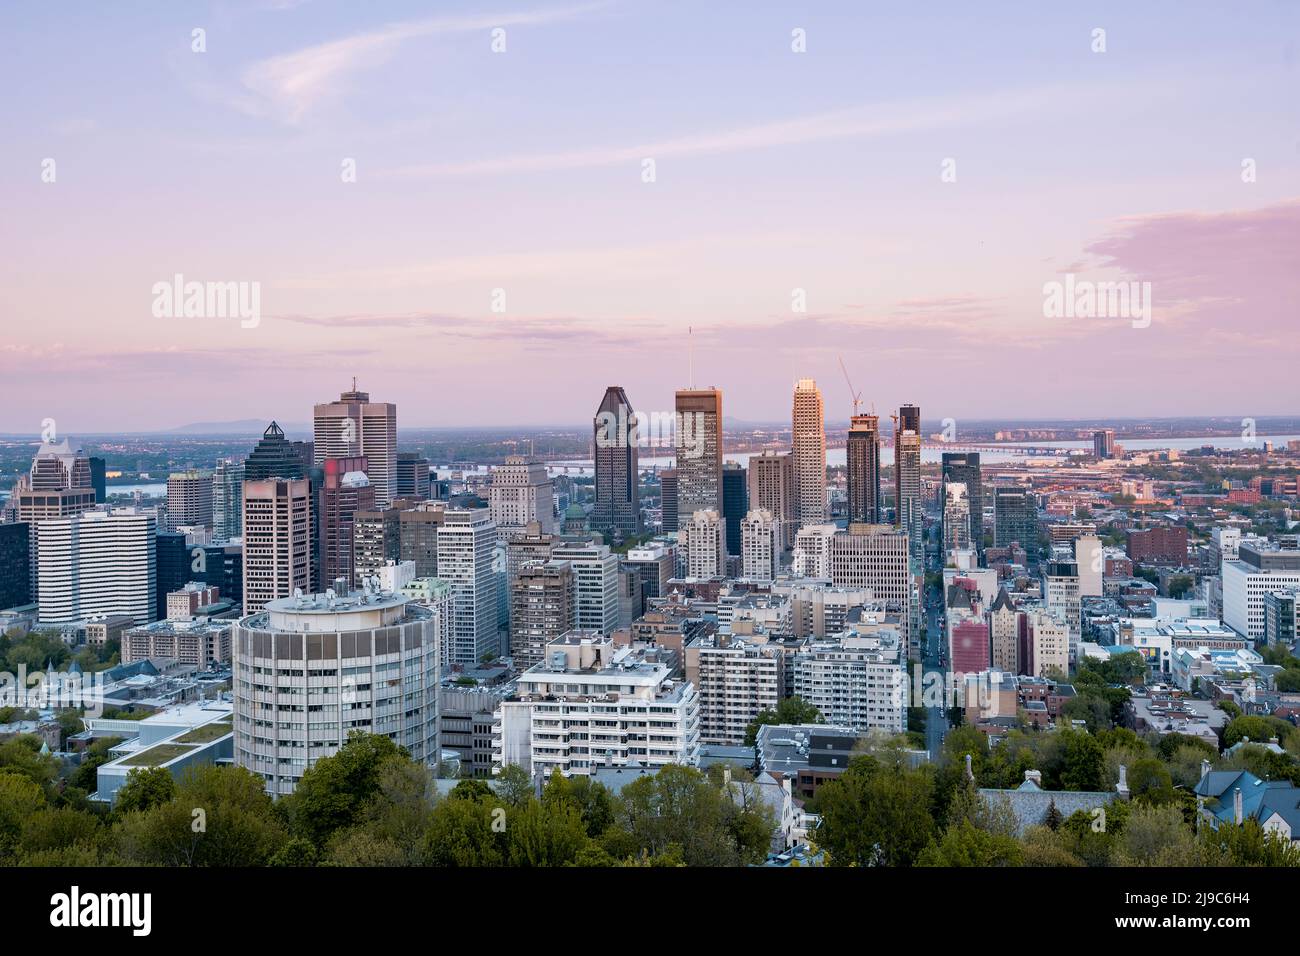 The Montreal skyline at sunset Stock Photo